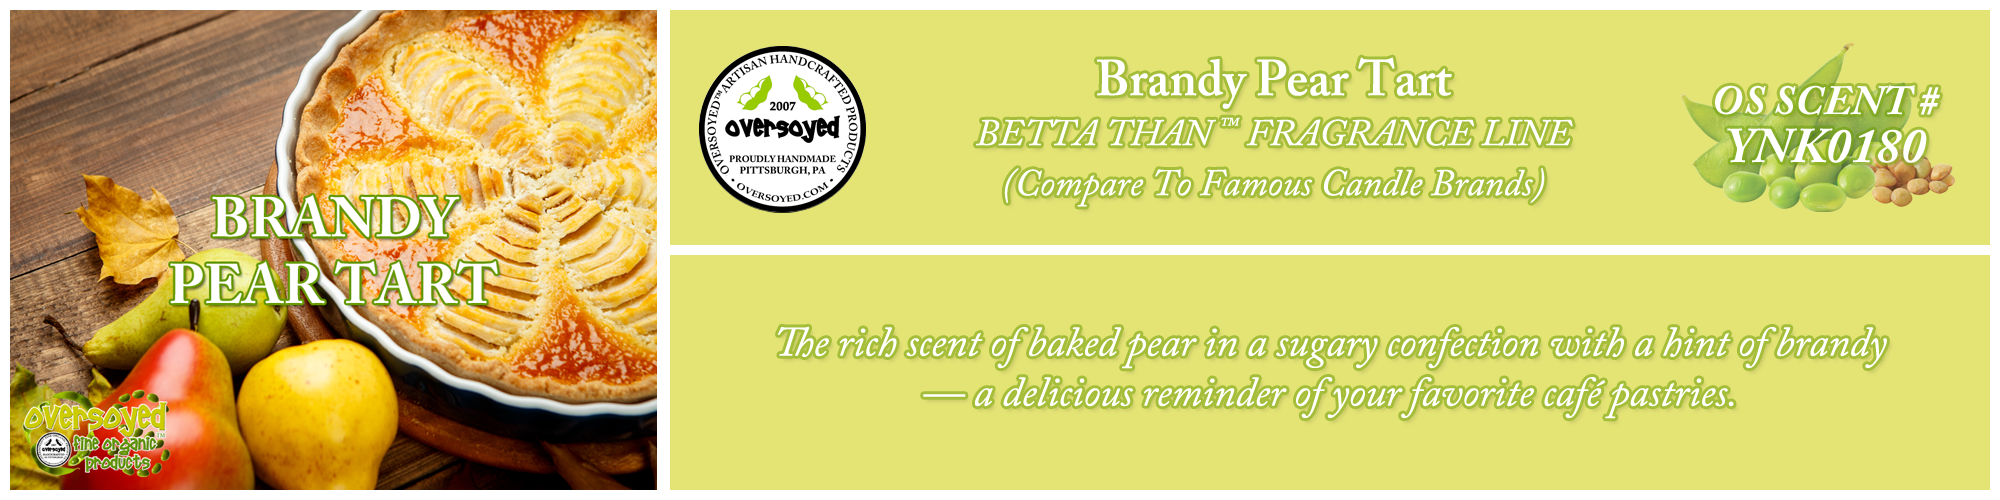 Brandy Pear Tart Handcrafted Products Collection